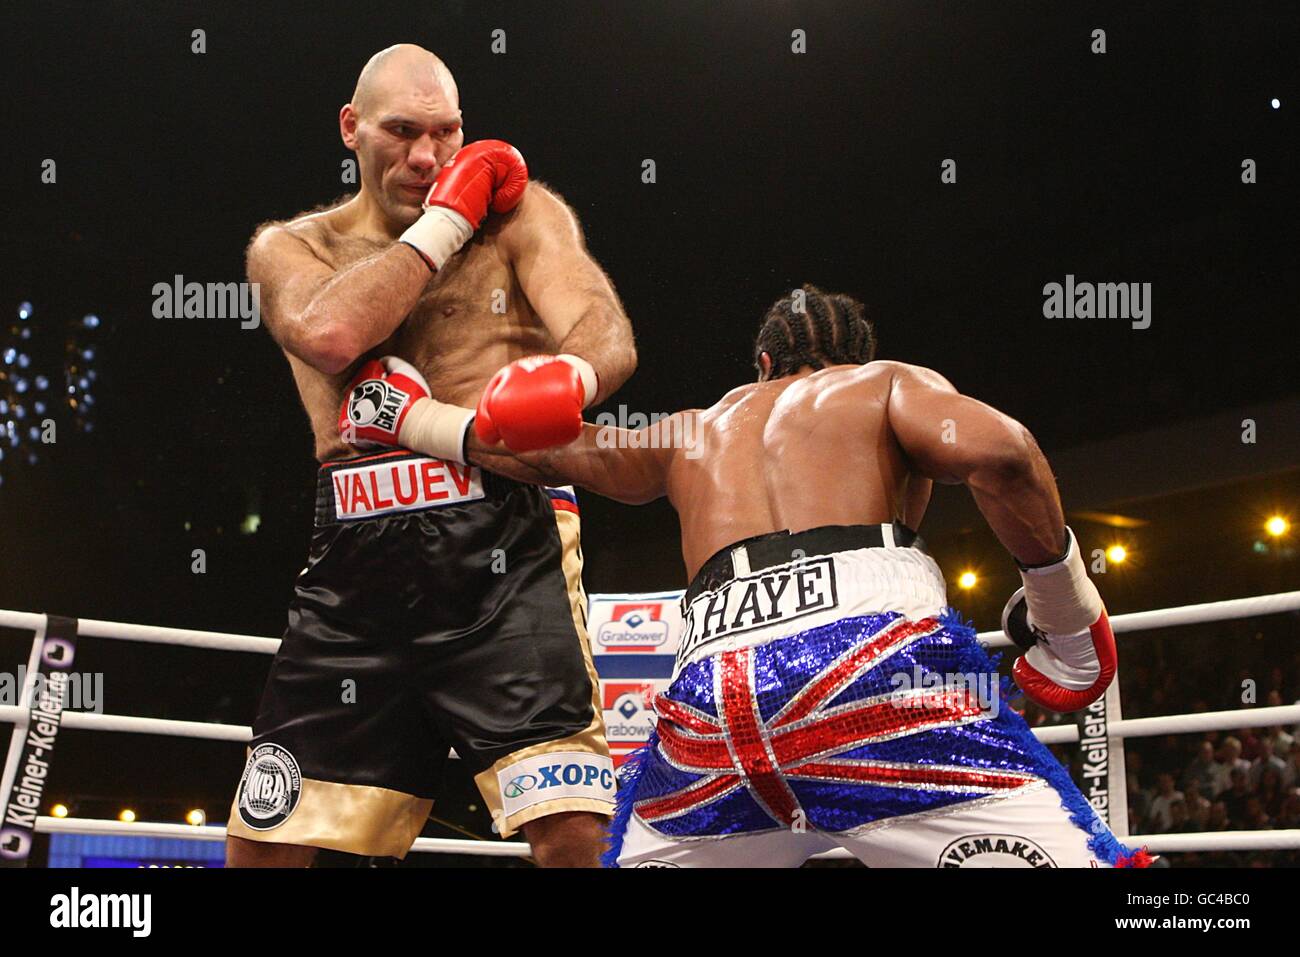 England's David Haye (right) on the attack against Russia's Nikolai Valuev during the WBA World Heavyweight title fight at the Nuremberg Arena, Germany Stock Photo